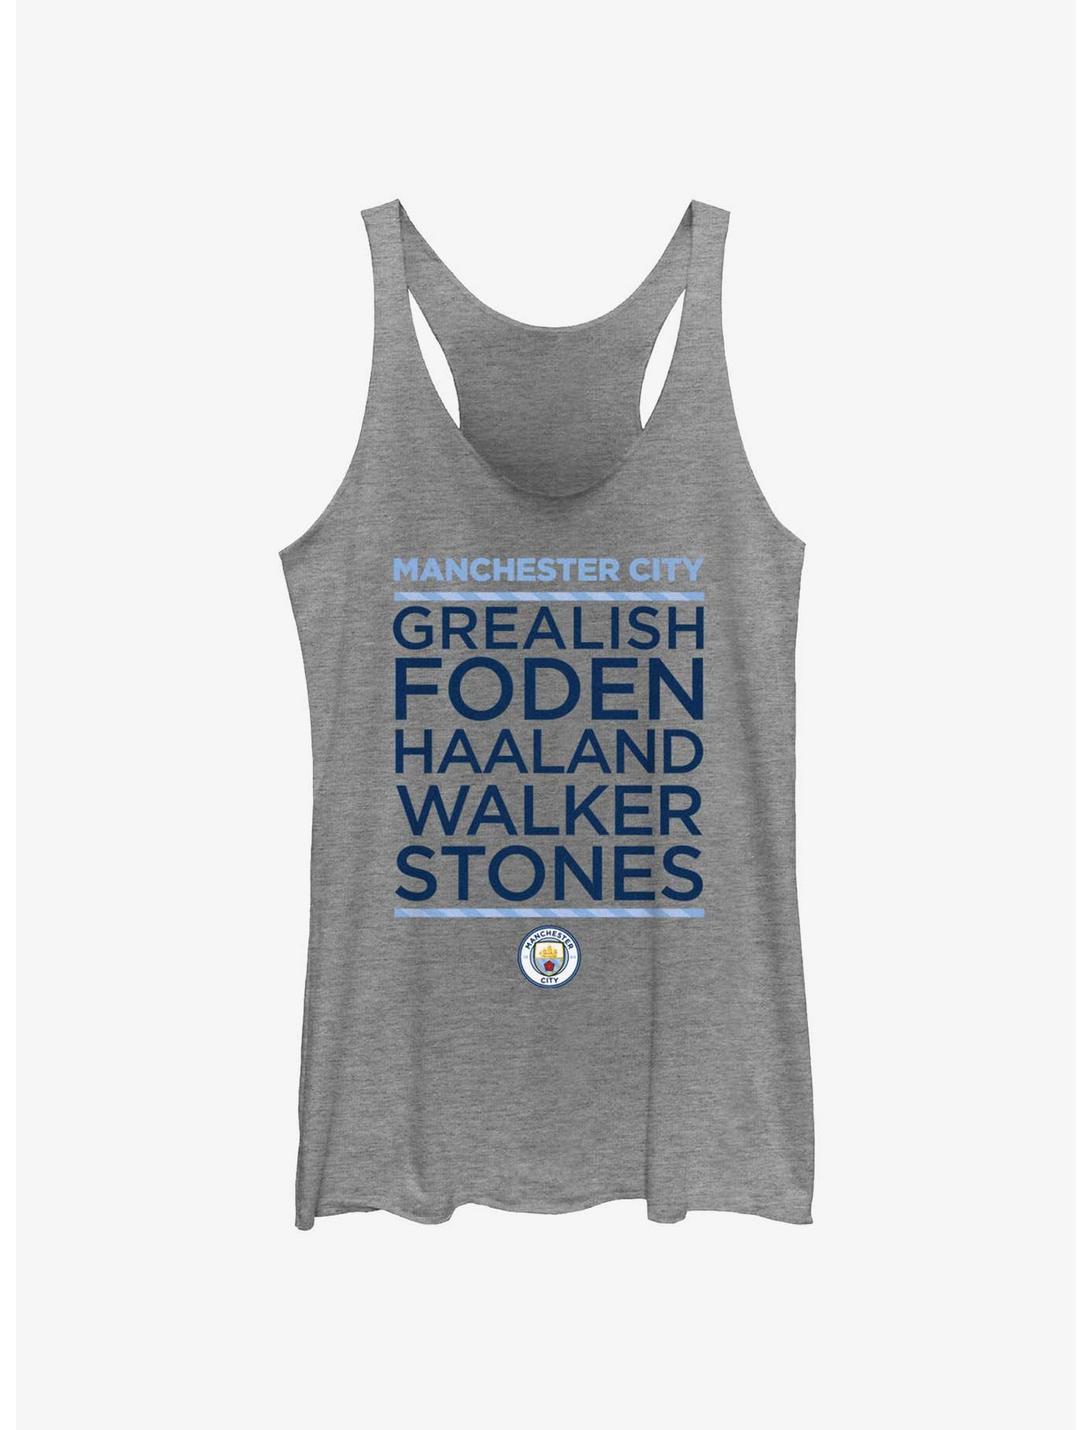 Premier League Manchester City F.C. Grealish, Foden, Haaland, Walker, and Stones Girls Tank, GRAY HTR, hi-res